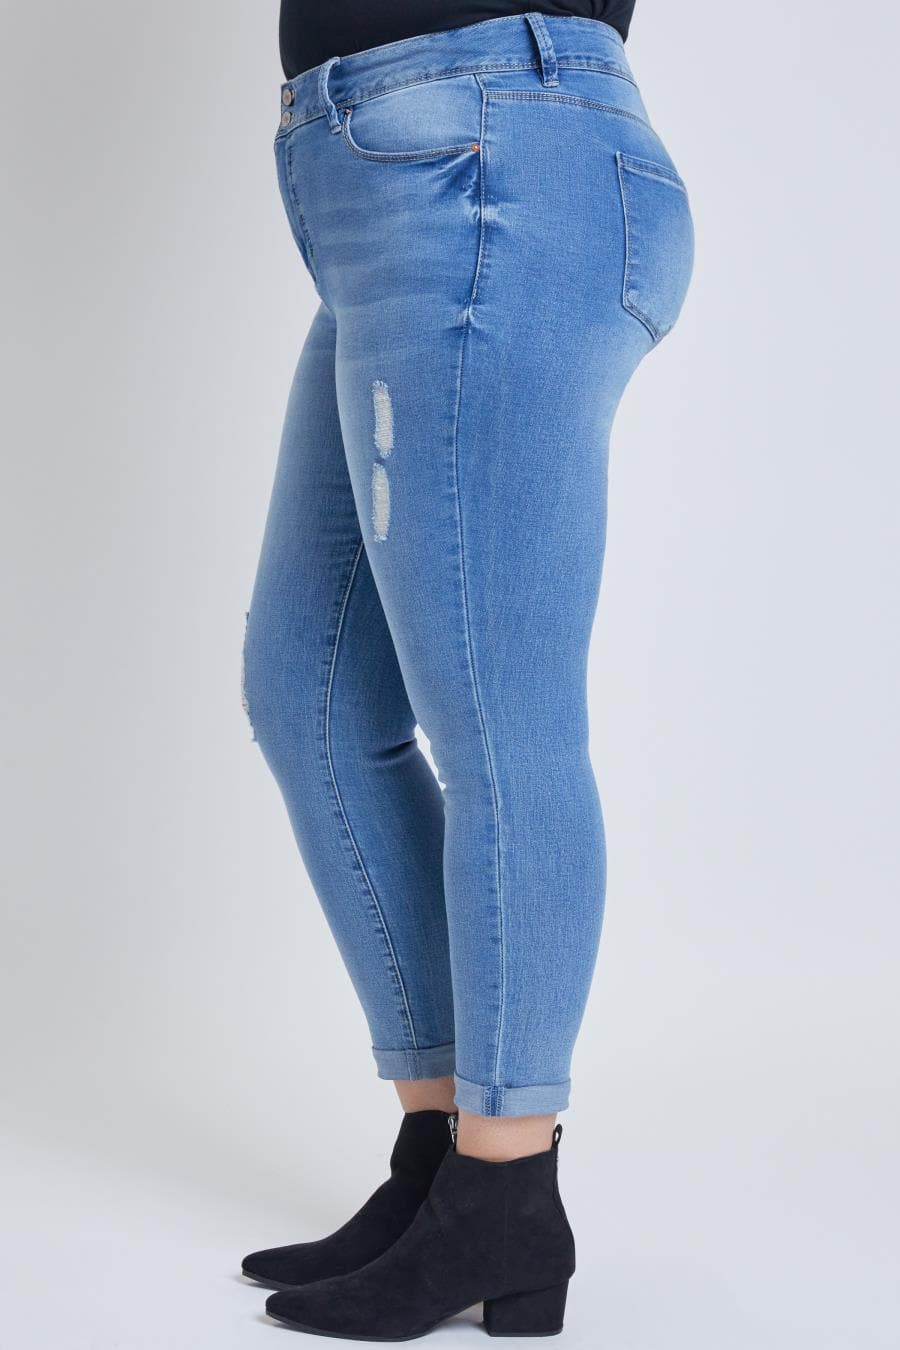 Women Plus Size Hide Your Muffin Top Rolled Cuff Ankle Jeans Xp938141